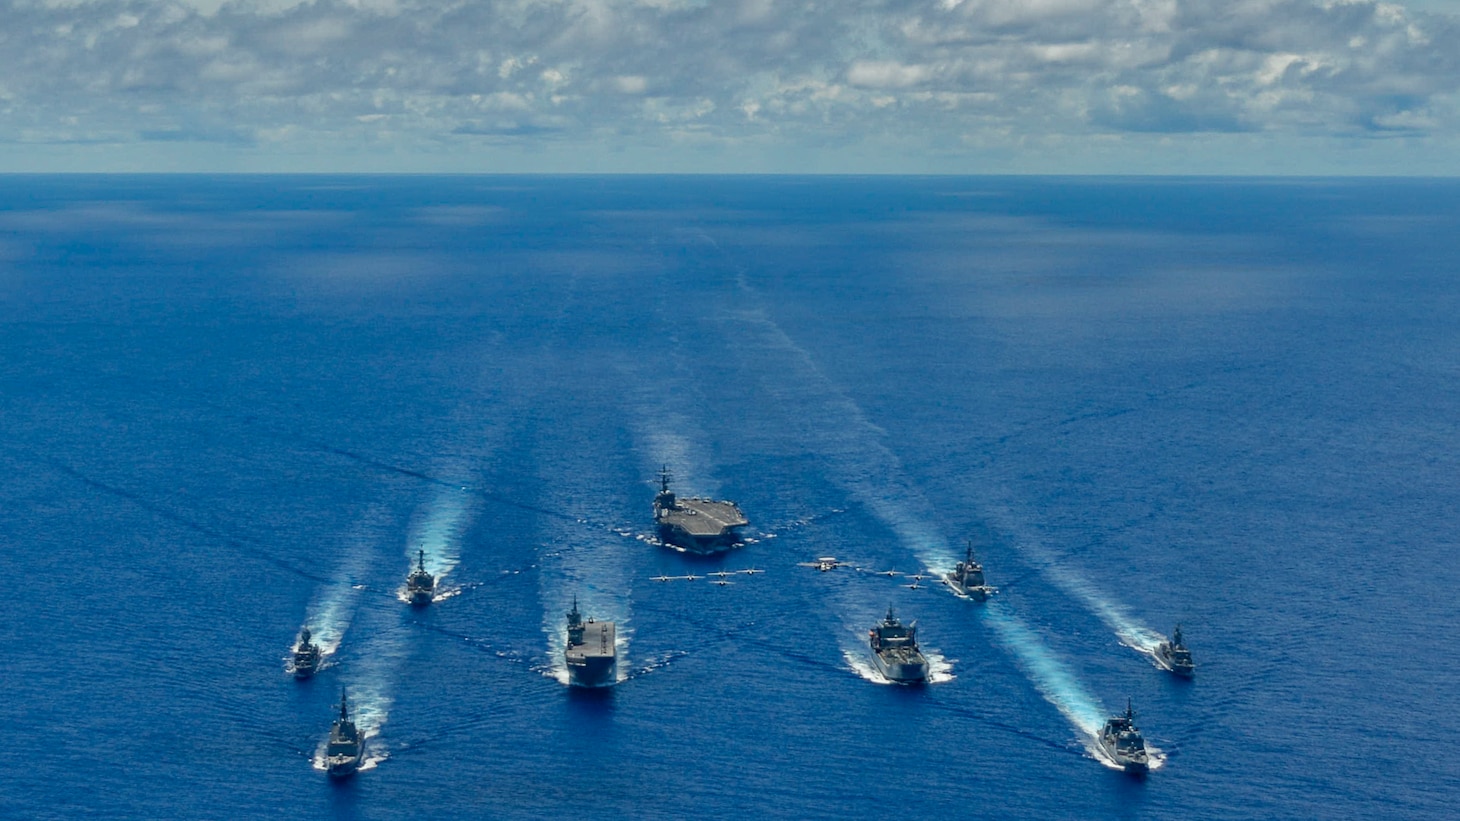 The Ronald Reagan Carrier Strike Group and units from the Japan Maritime Self-Defense Force (JSMDF) and Australian Defense Force (ADF) participate in trilateral exercises supporting shared goals of peace and stability, while enhancing regional security and the right of all nations to trade, communicate, and choose their destiny in a Free and Open Indo-Pacific. The Ronald Reagan Carrier Strike Group is the U.S. Navy's only forward-deployed strike group and one of America's most visible symbols of resolve.